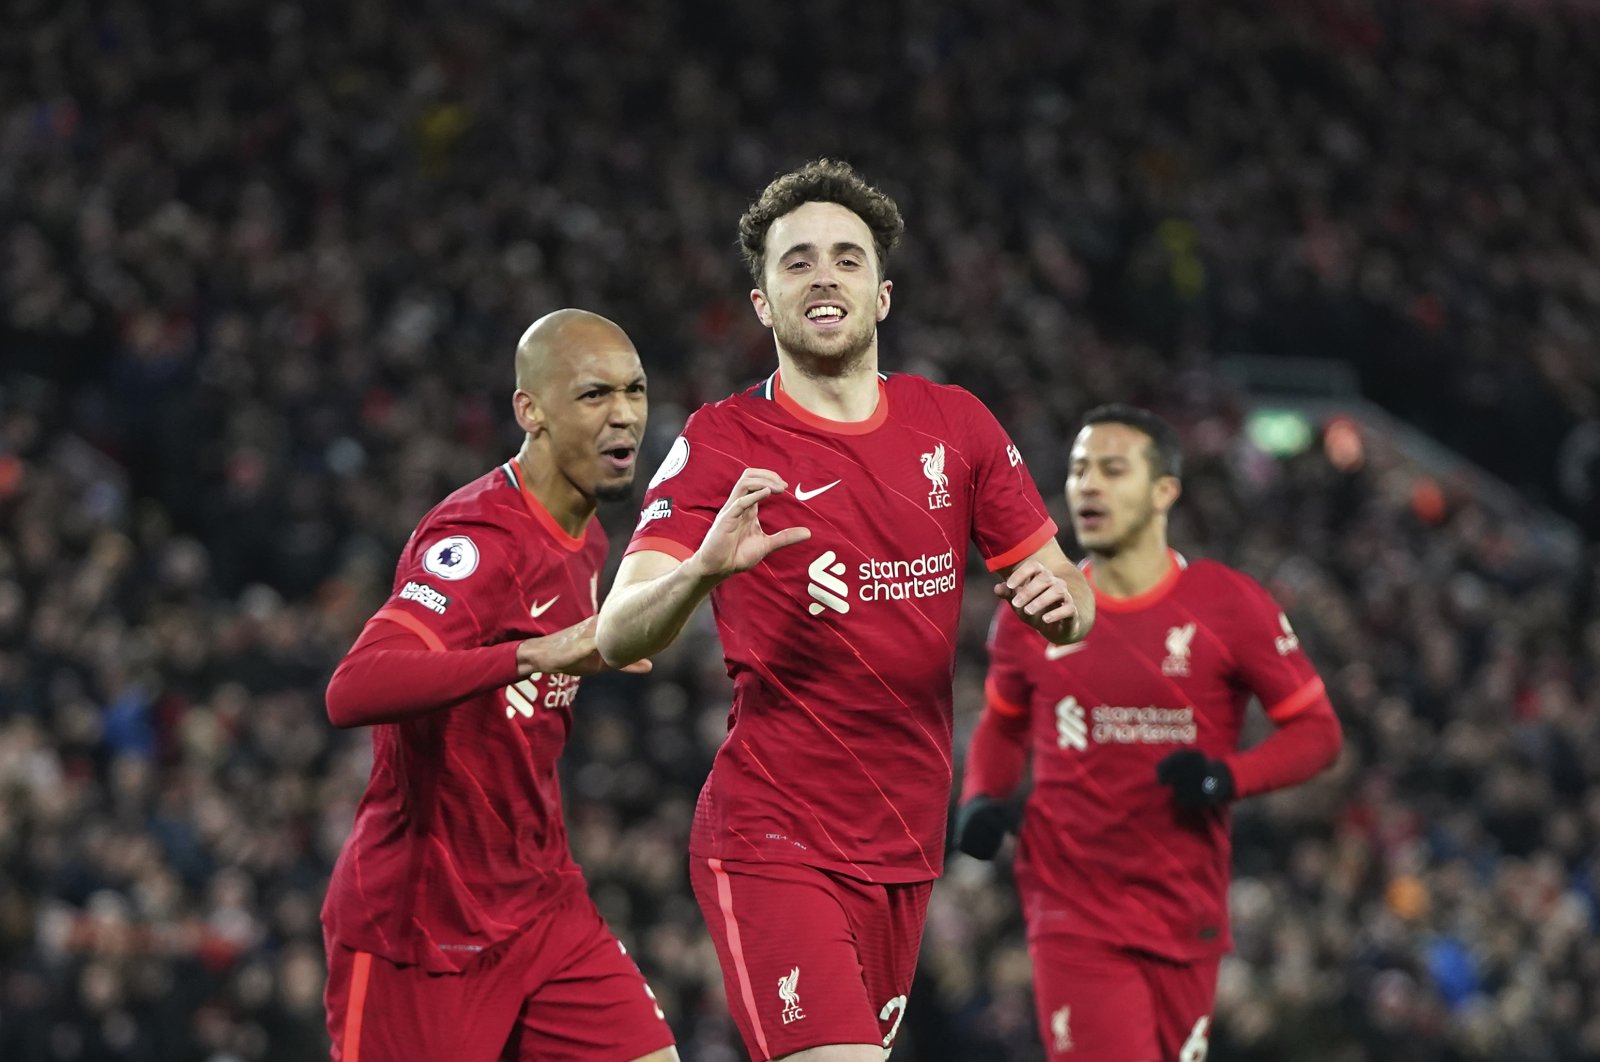 Liverpool&#039;s Diogo Jota (C) celebrates with his teammates after scoring in a Premier League match against Leicester City, Liverpool, England, Feb. 10, 2022. (AP Photo)